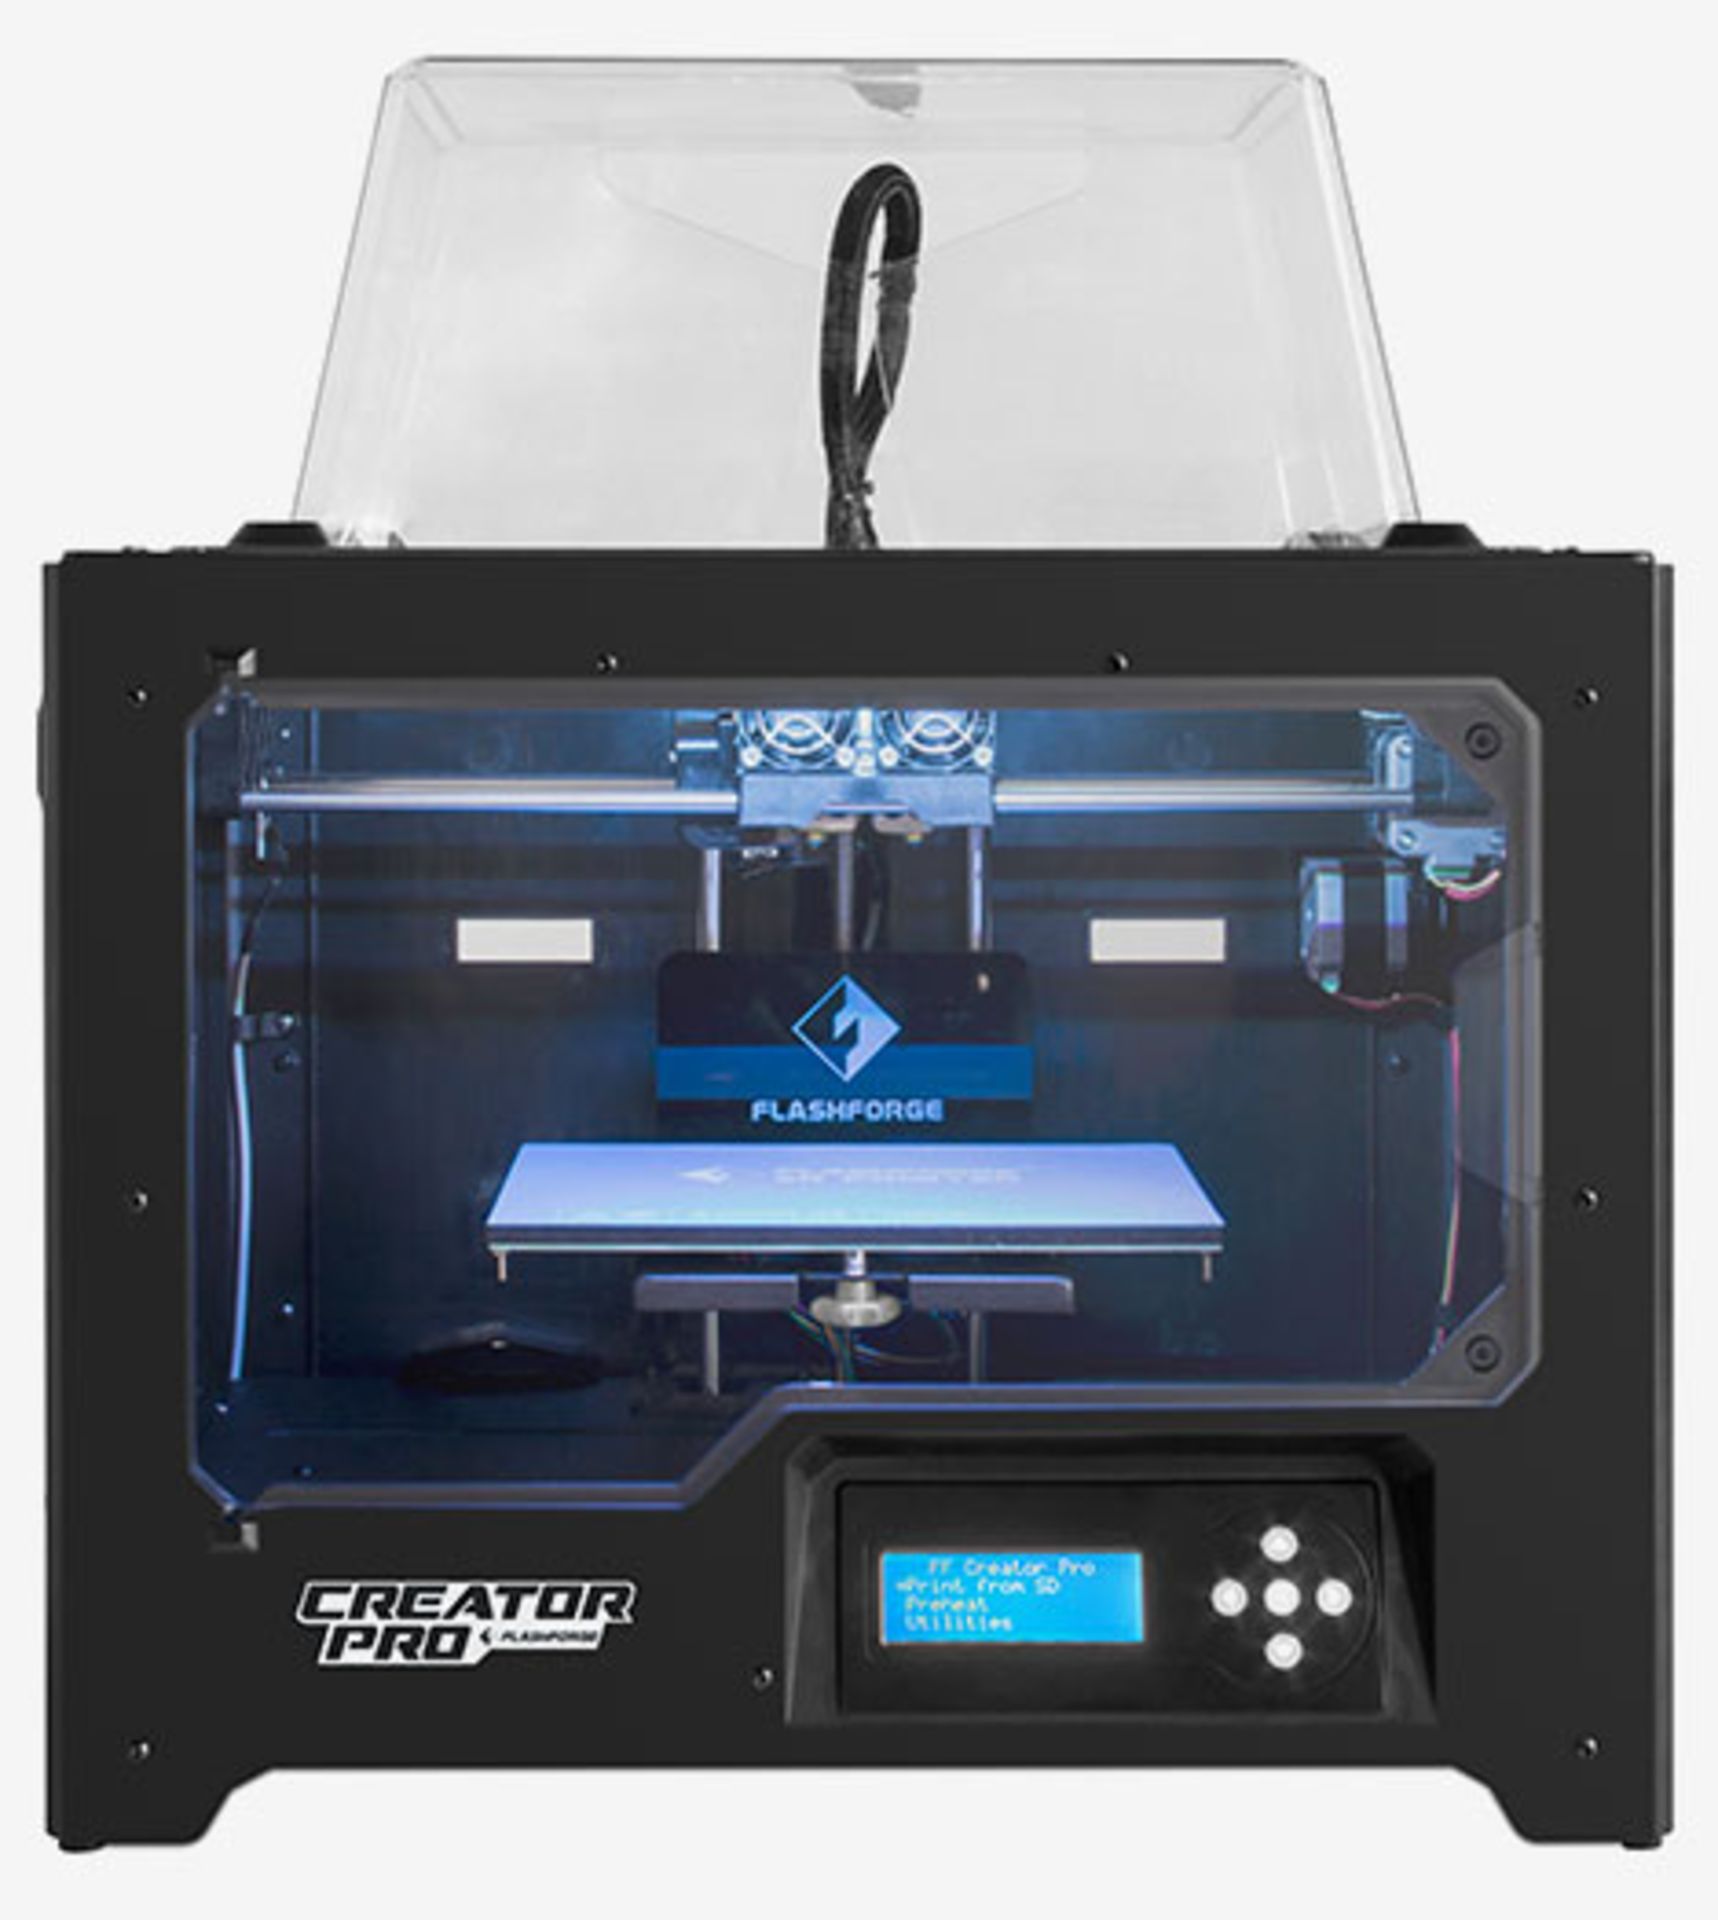 Flashforge Creater Pro 3D Printer. - P2. RRP £850.00. Thanks to the open source technology, the